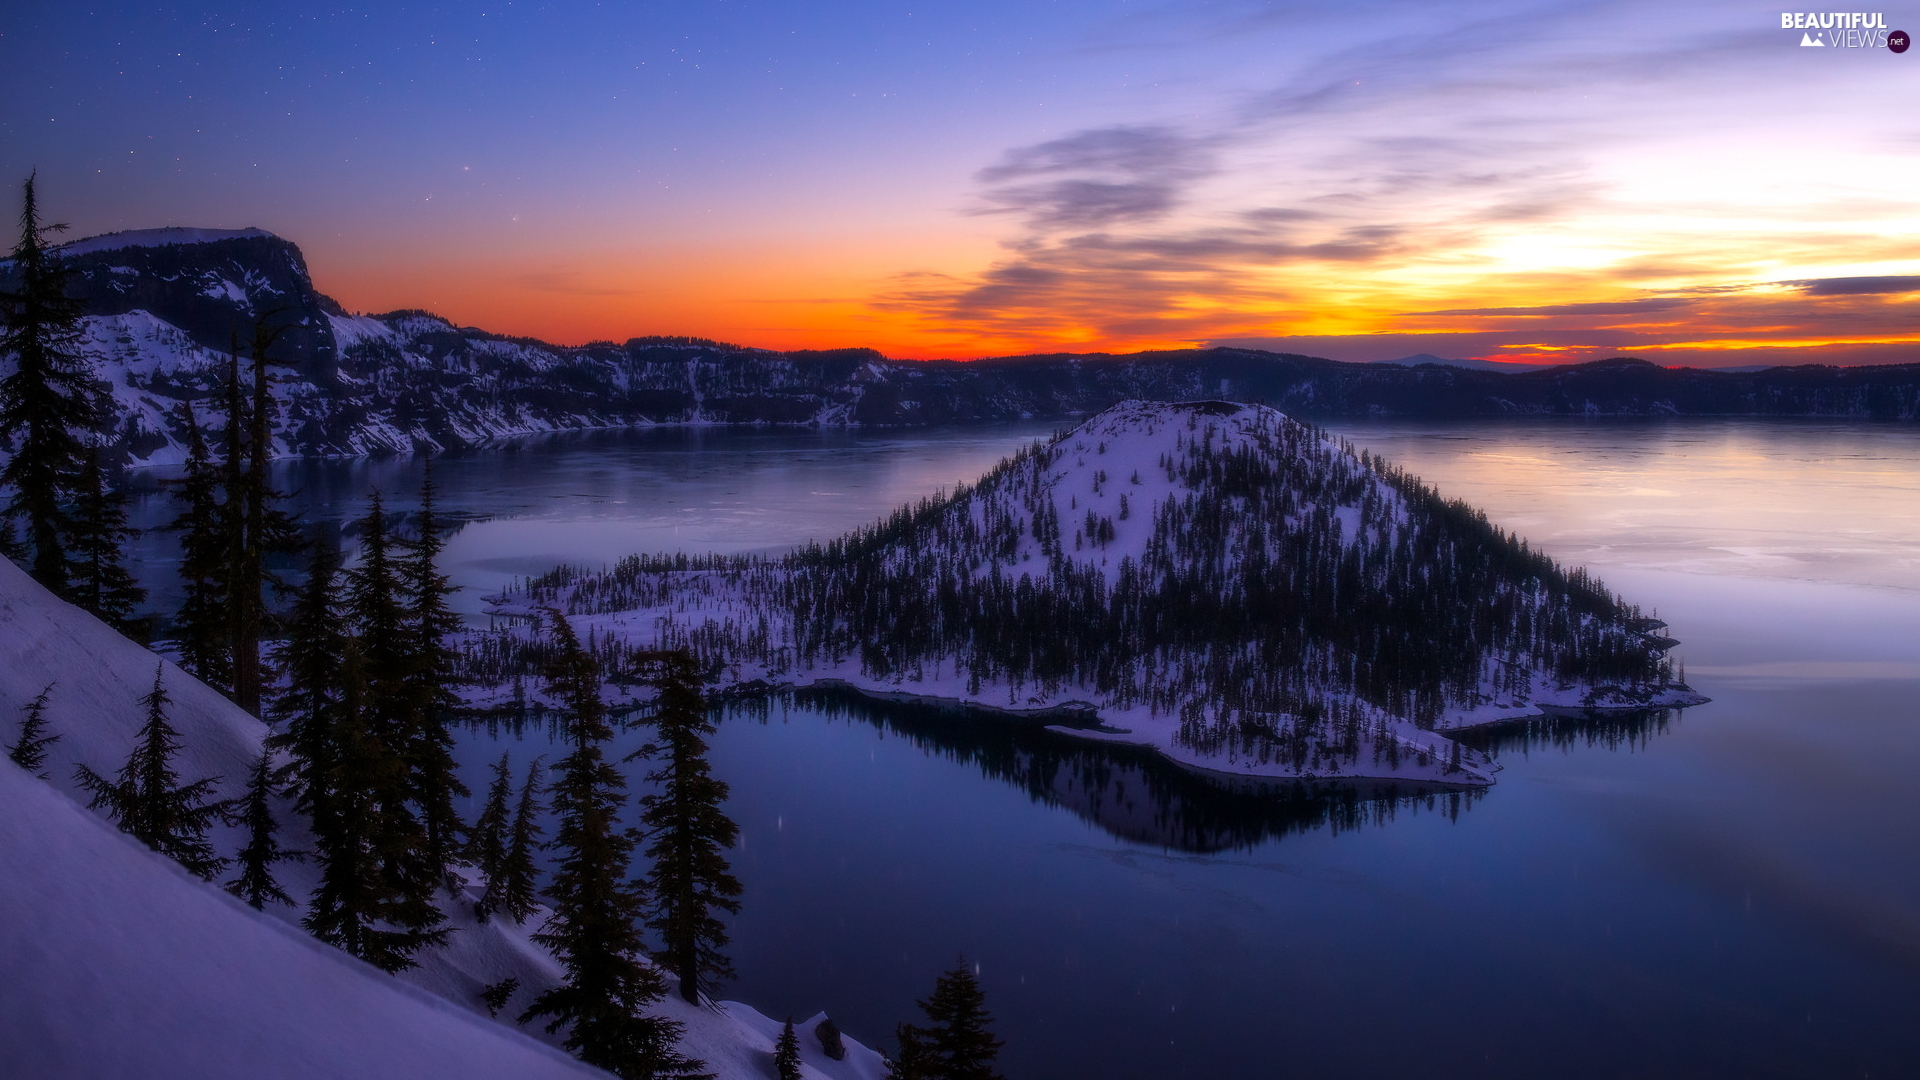 Great Sunsets, Crater Lake National Park, trees, Mountains, snow, The United States, State of Oregon, Island of Wizard, Crater Lake, winter, viewes views wallpaper: 1920x1080